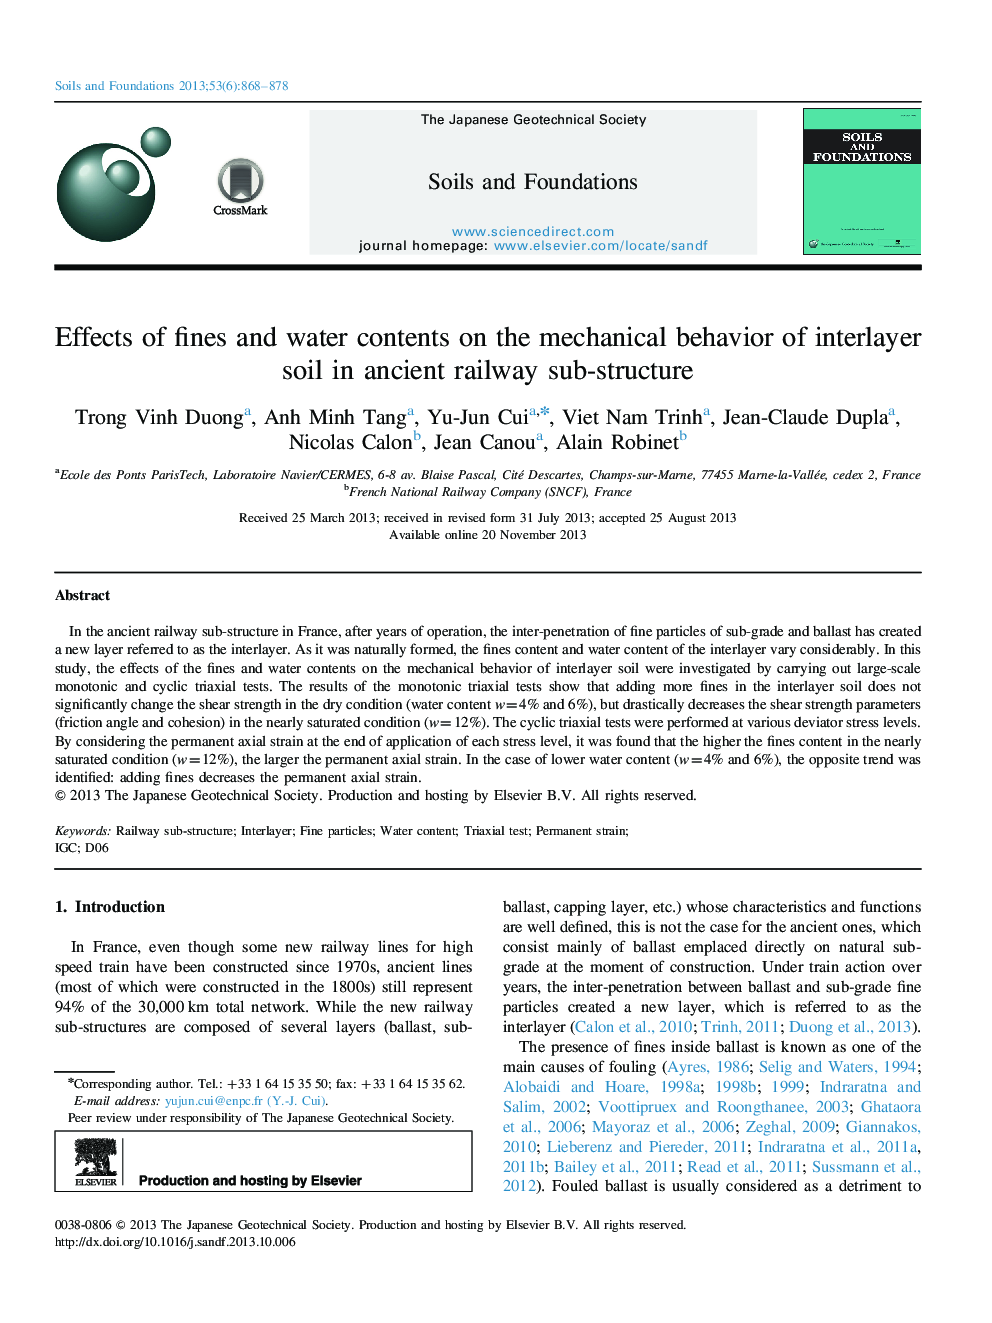 Effects of fines and water contents on the mechanical behavior of interlayer soil in ancient railway sub-structure 